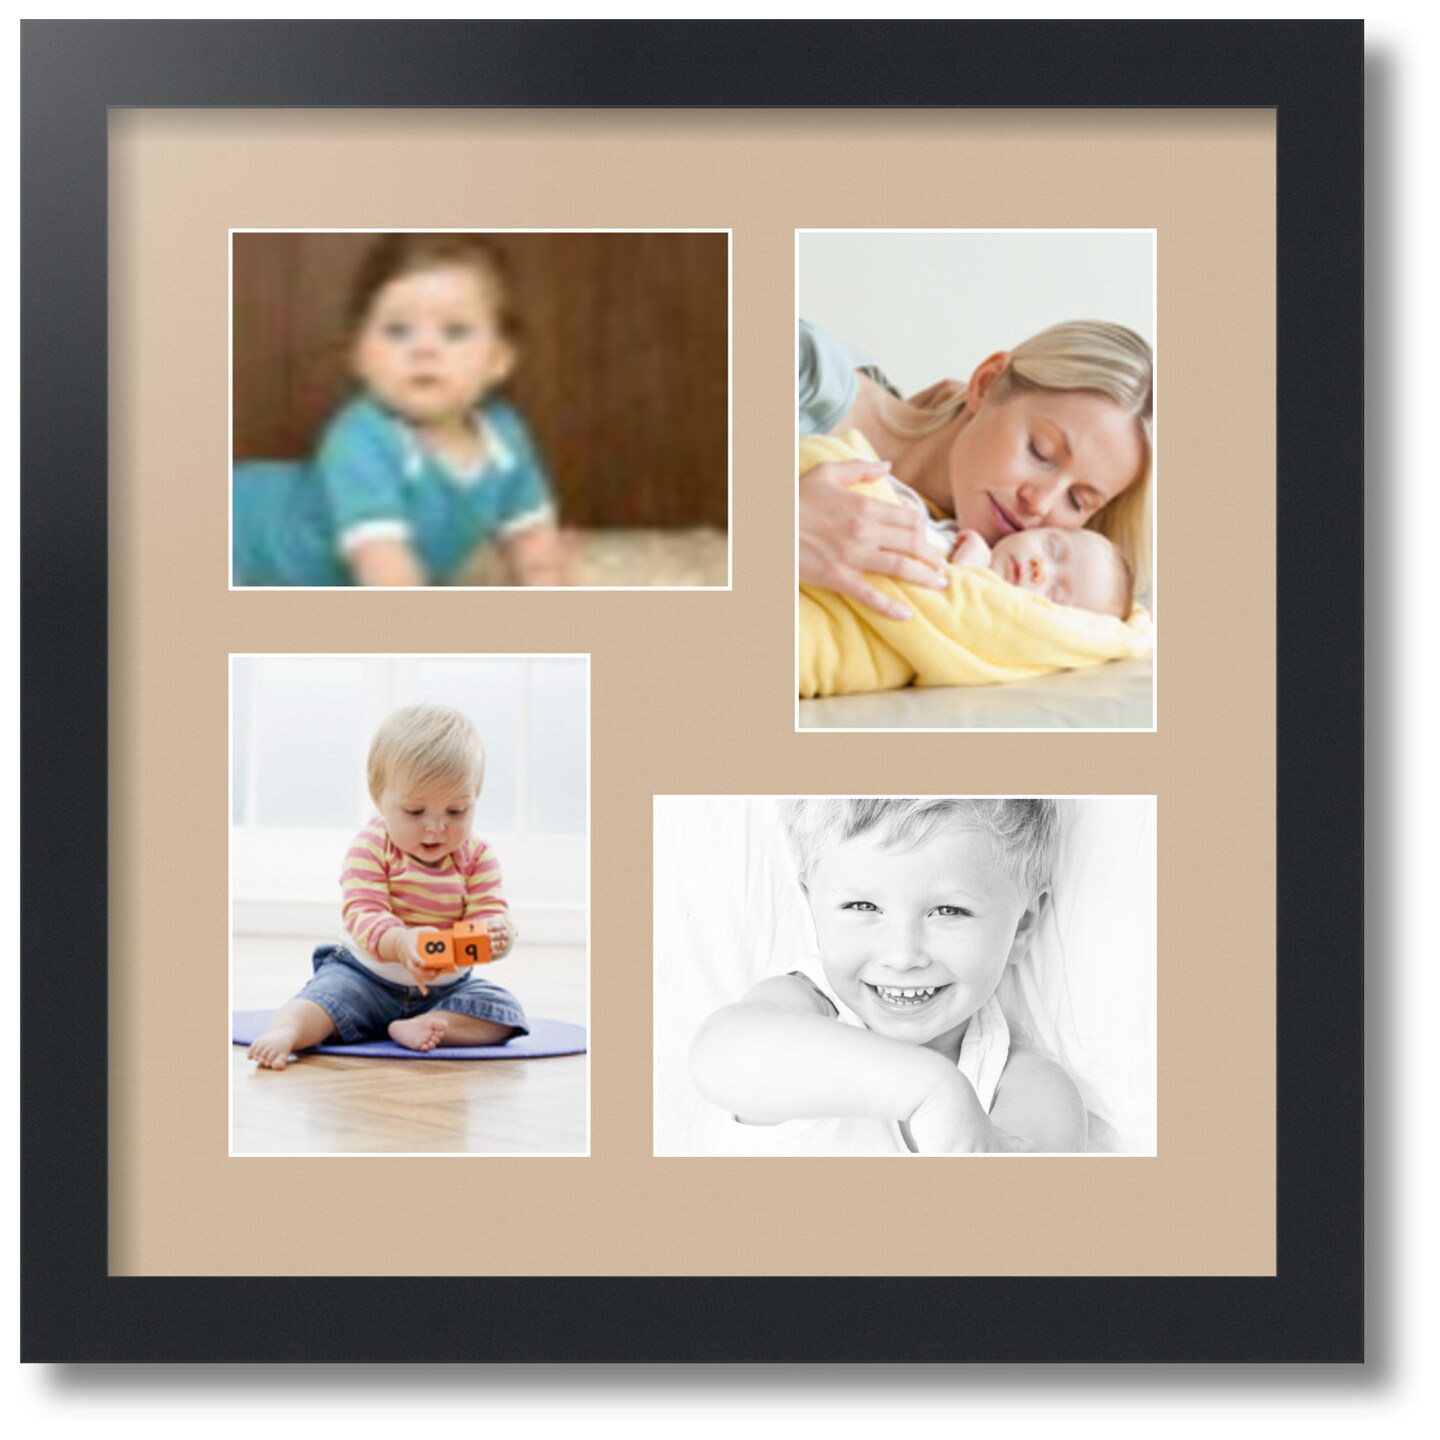 ArtToFrames Collage Photo Picture Frame with 4 - 5x7 inch Openings, Framed in Black with Over 62 Mat Color Options and Plexi Glass (CSM-3926-179)